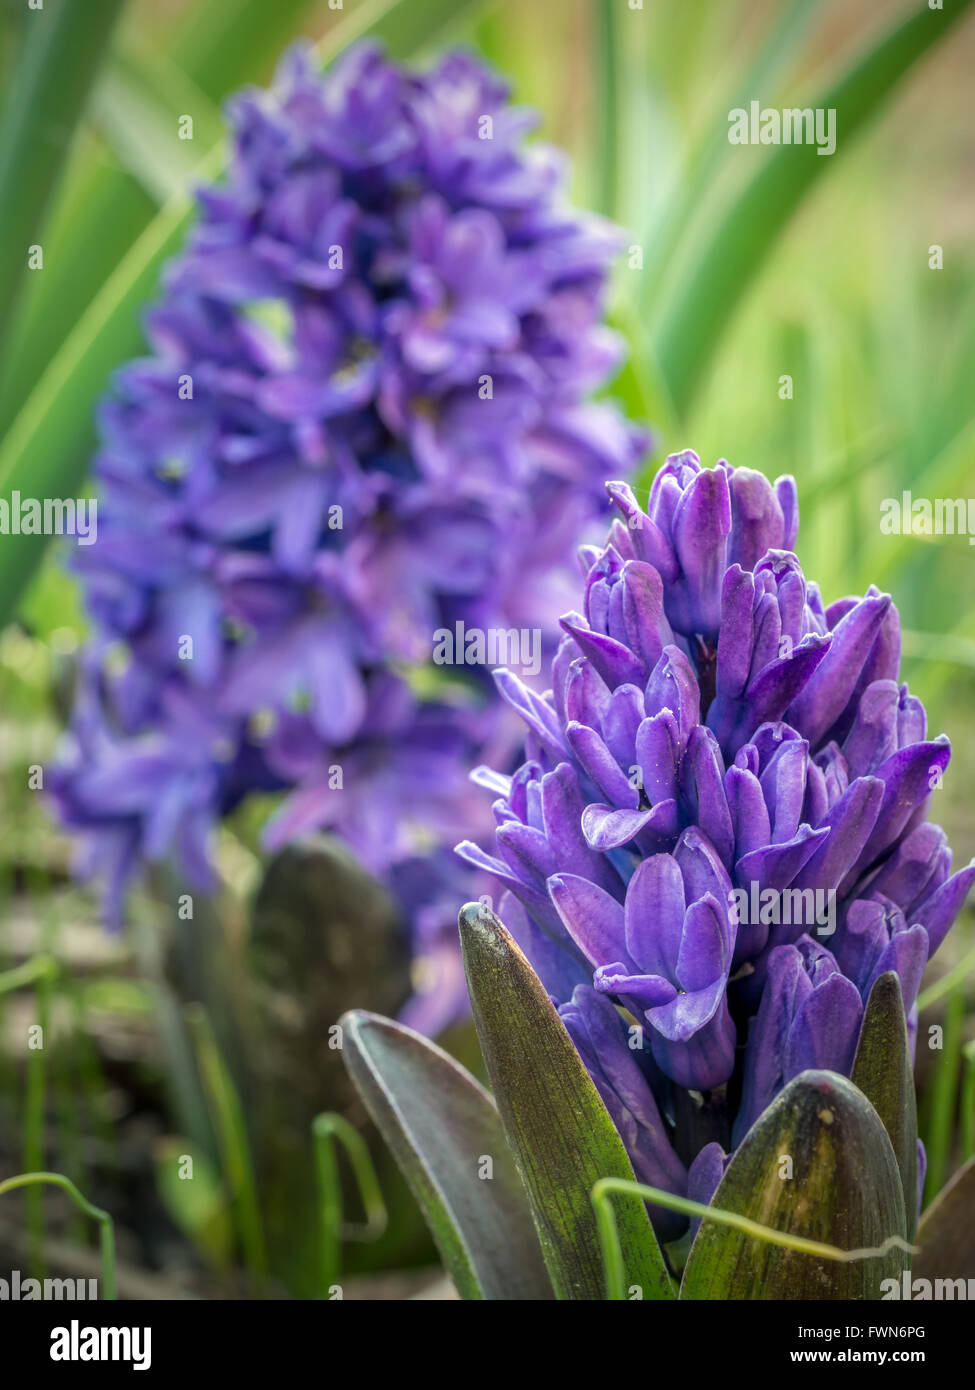 Violet hyacinth in blossom growing in the garden Stock Photo